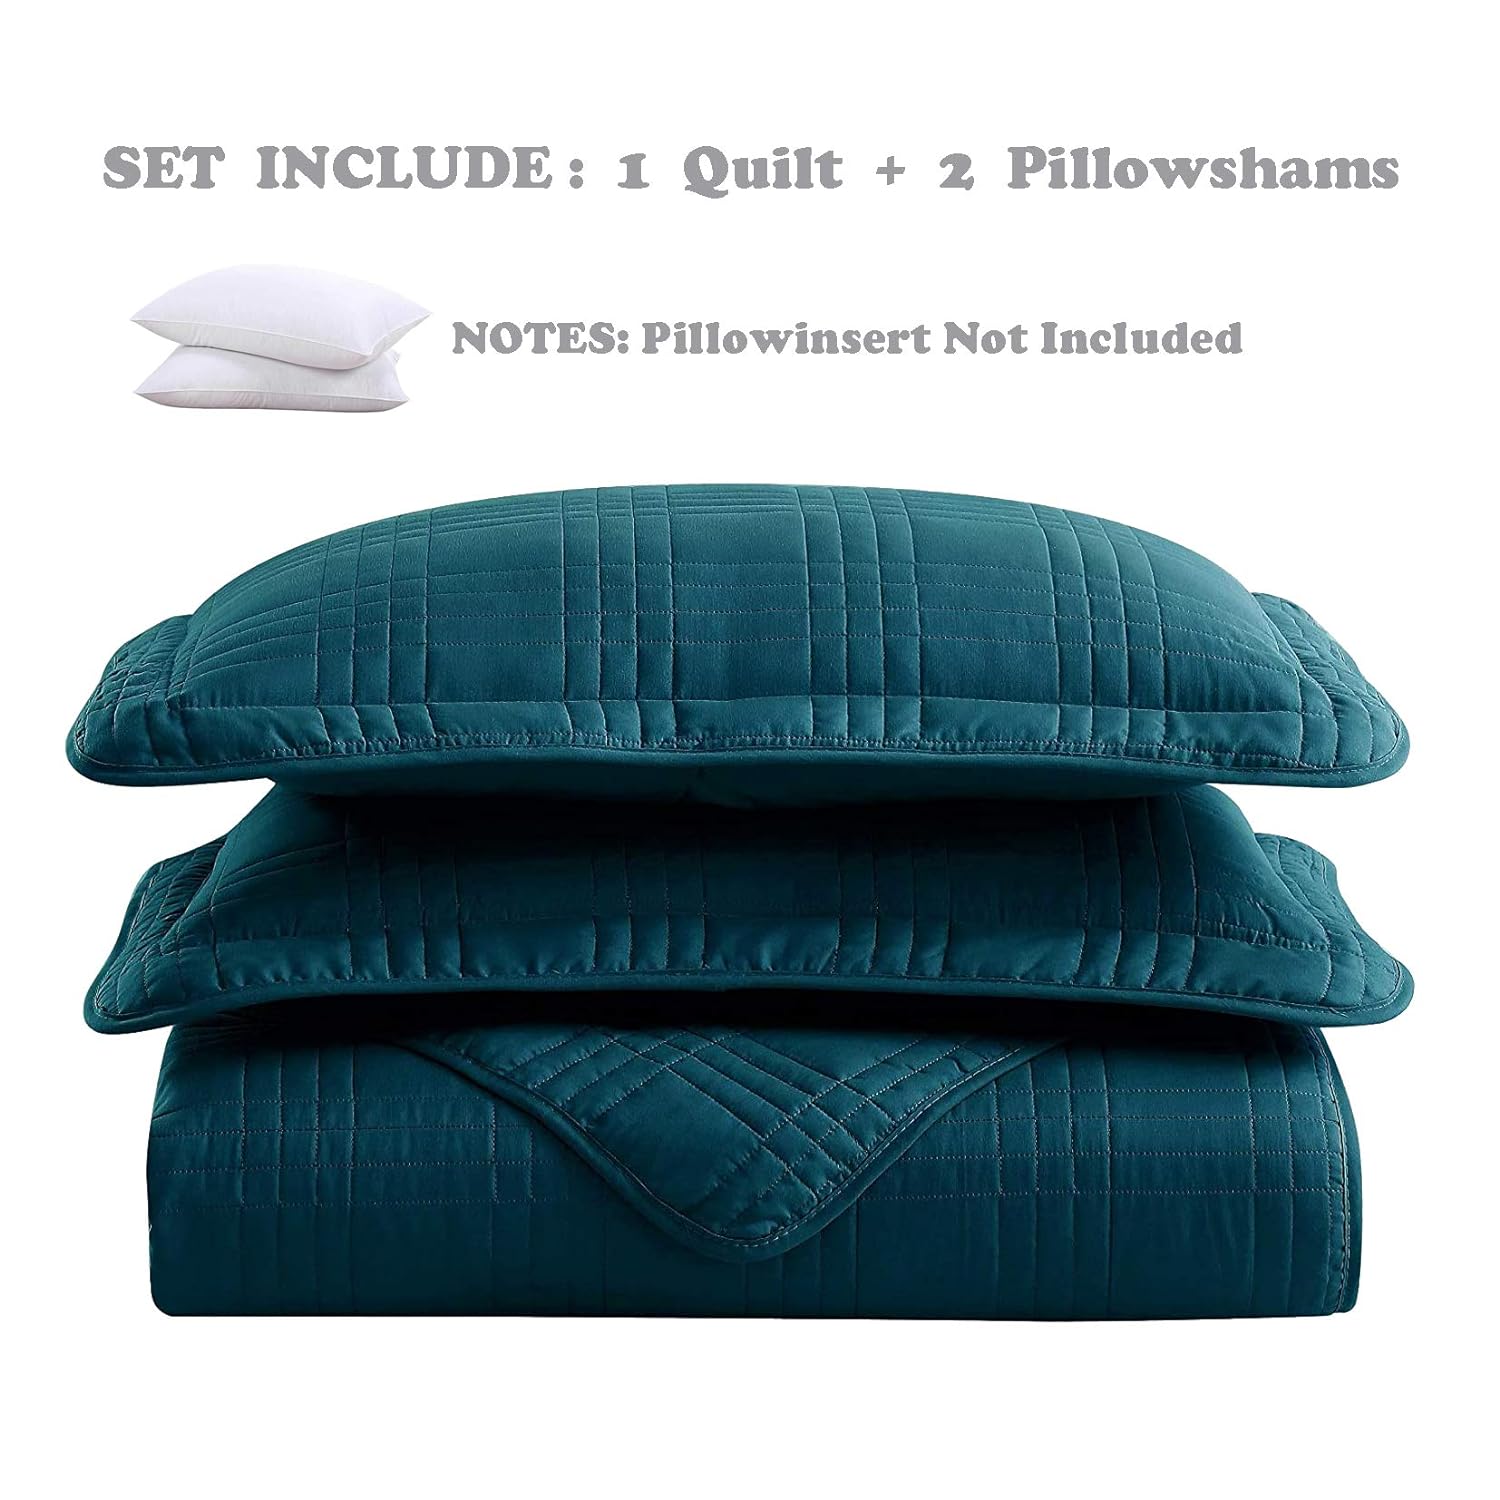 TKM Home Oversized King Quilts (118"X106"), Teal Bedspread Bedding Sets, Light Weight Stitching All Season Comforter Reversib…